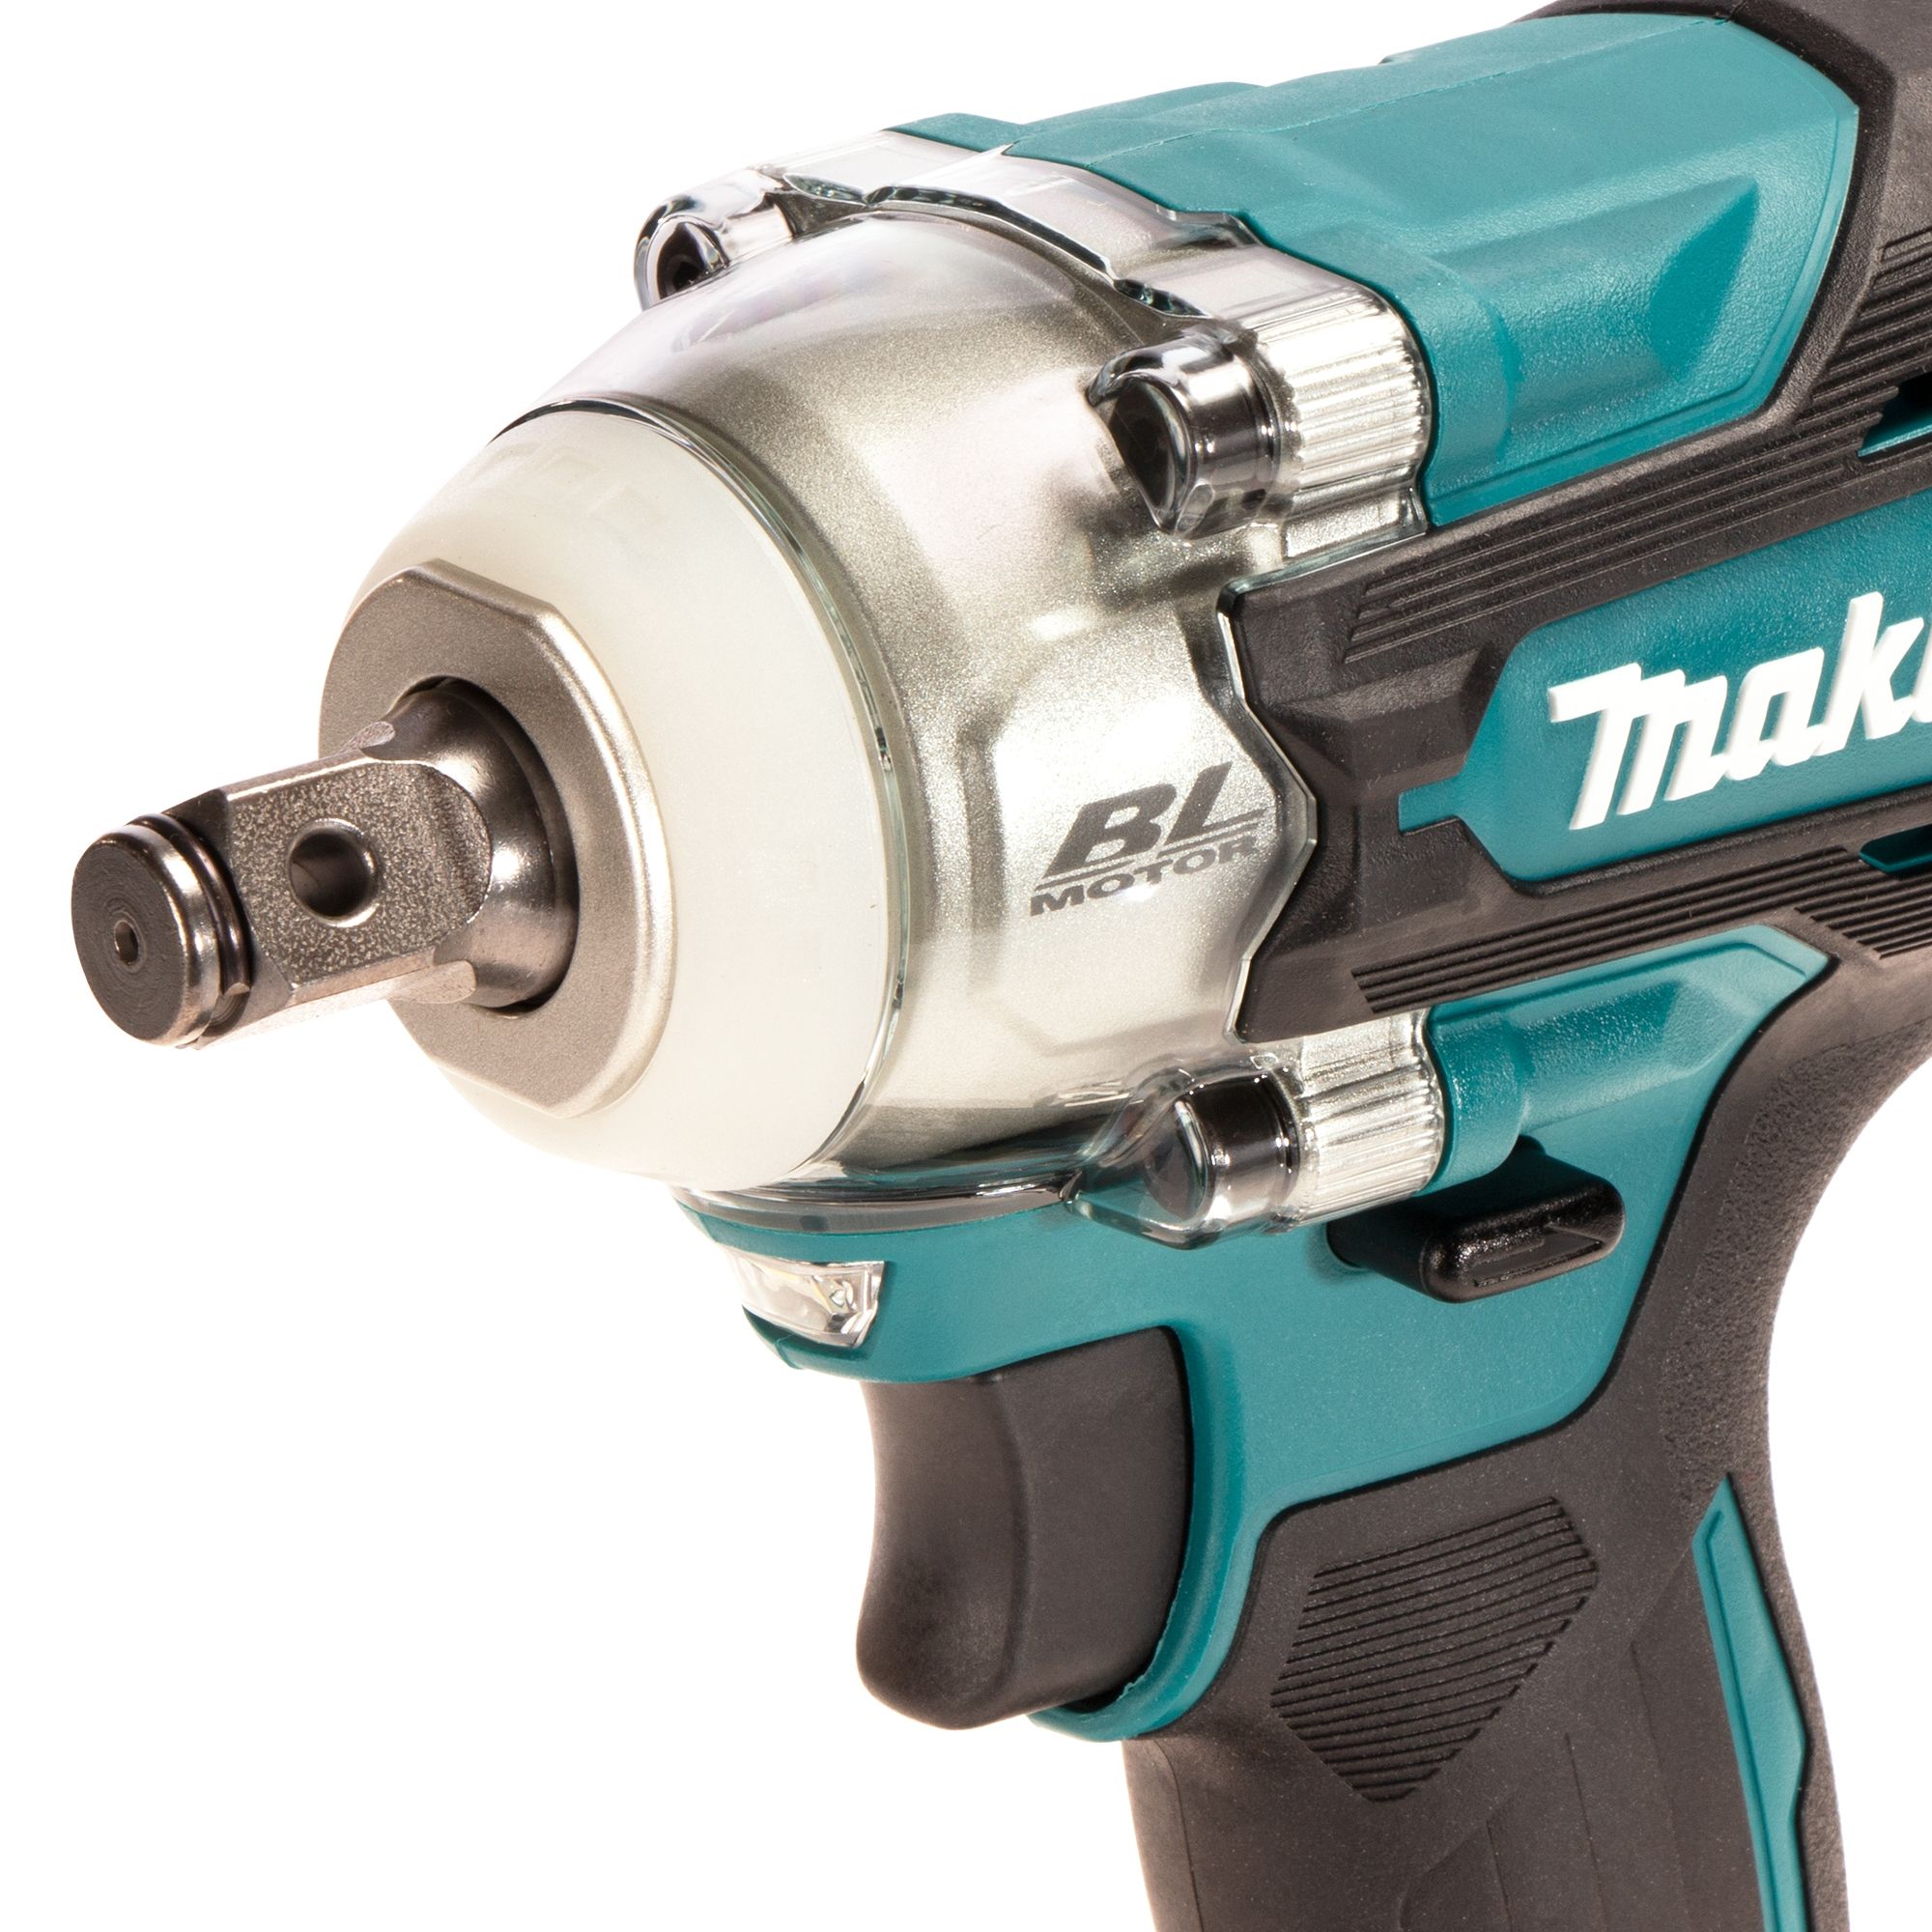 MAKITA DTW285Z 18V BRUSHLESS 1/2" IMPACT WRENCH BODY ONLY IN MAKPAC CASE 